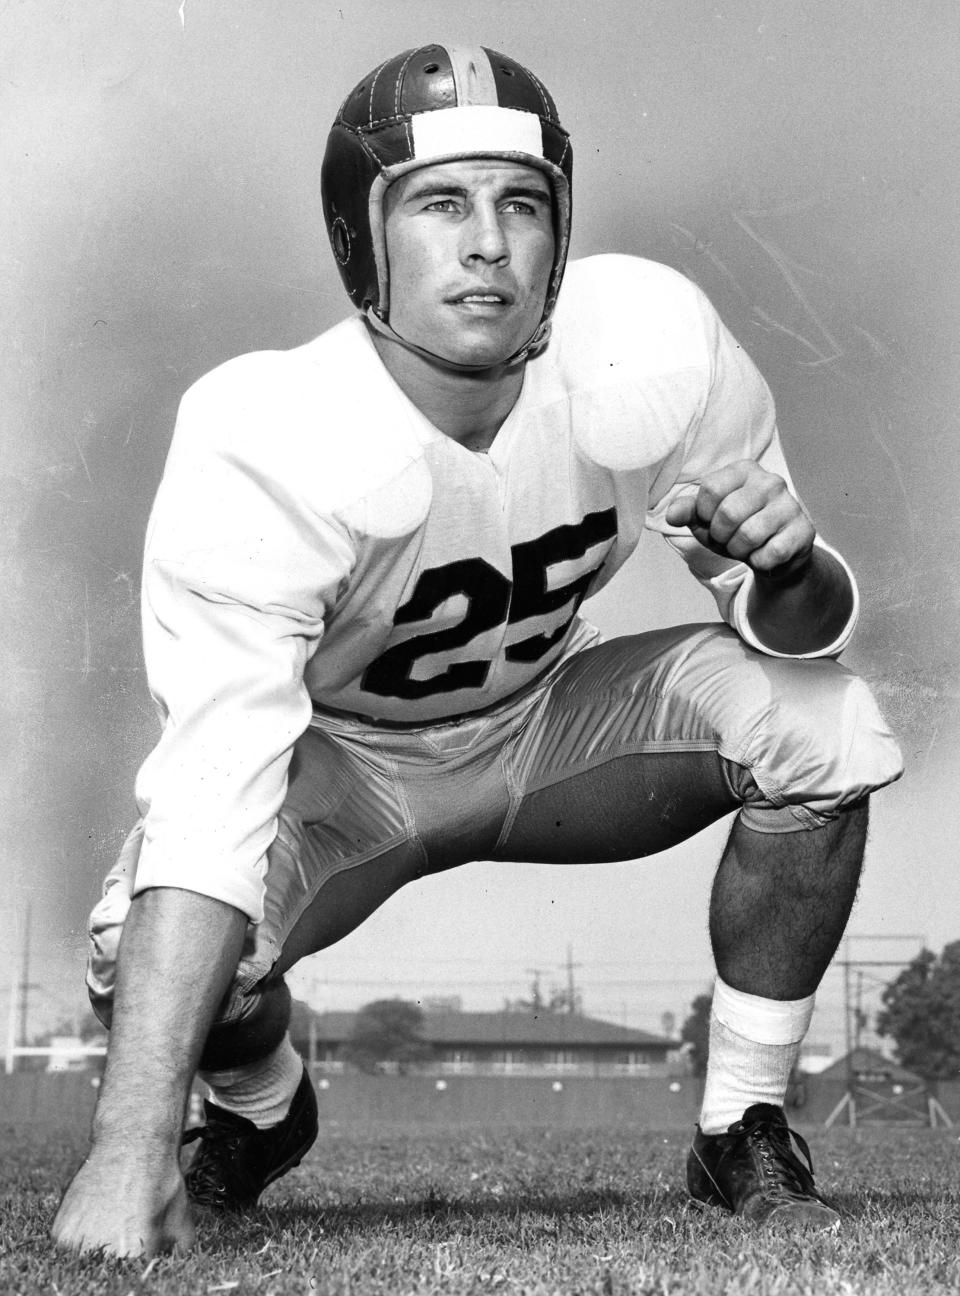 Akron native Harry Welch poses for a portrait during his 1951 season at USC.